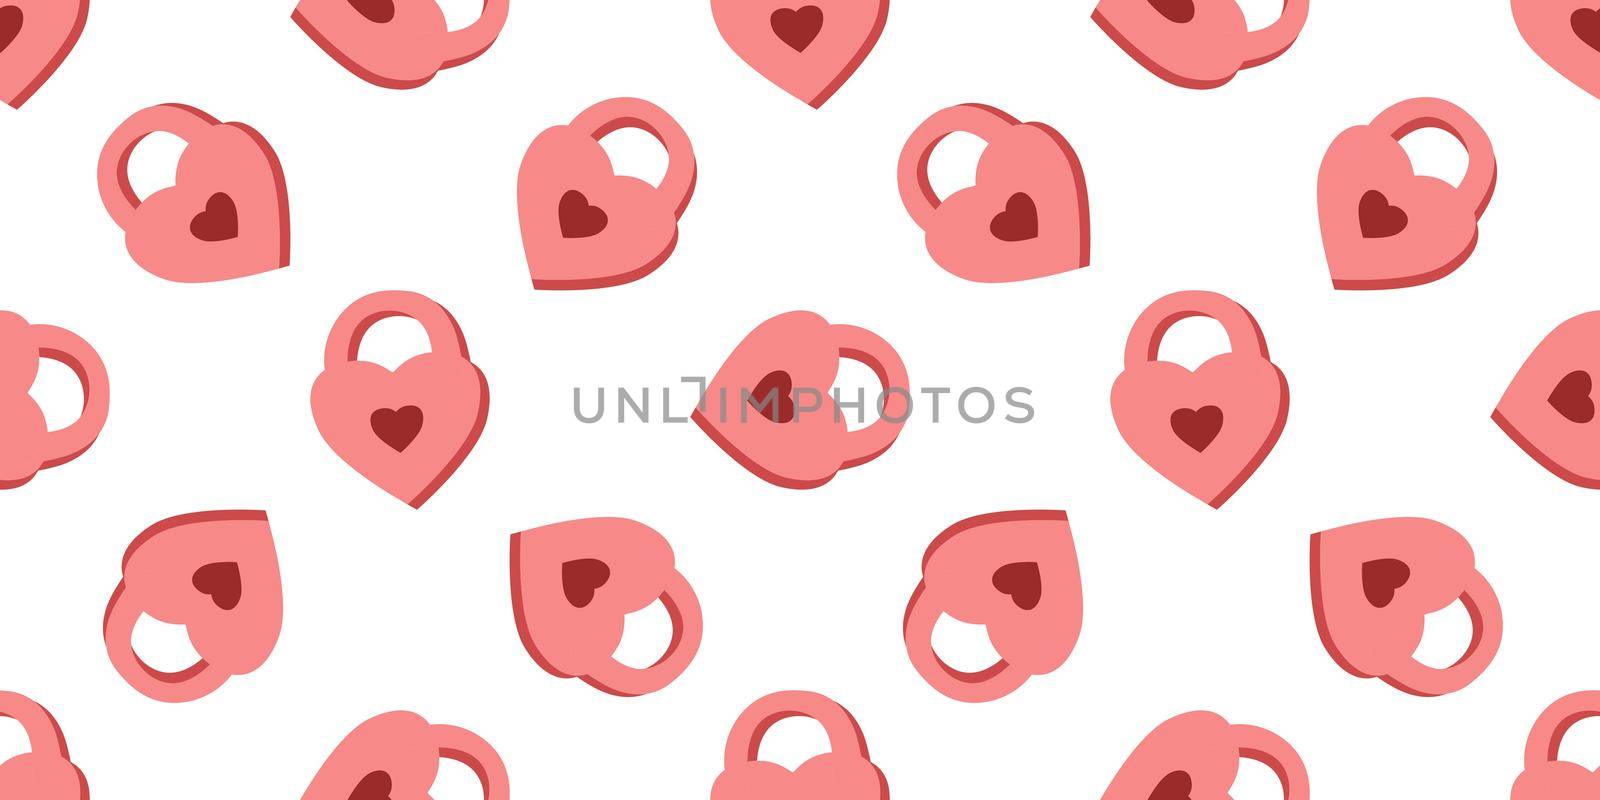 pattern for Valentine's Day. Love and hearts, February 14th. Pattern for textiles and packaging paper. Romantic motives.